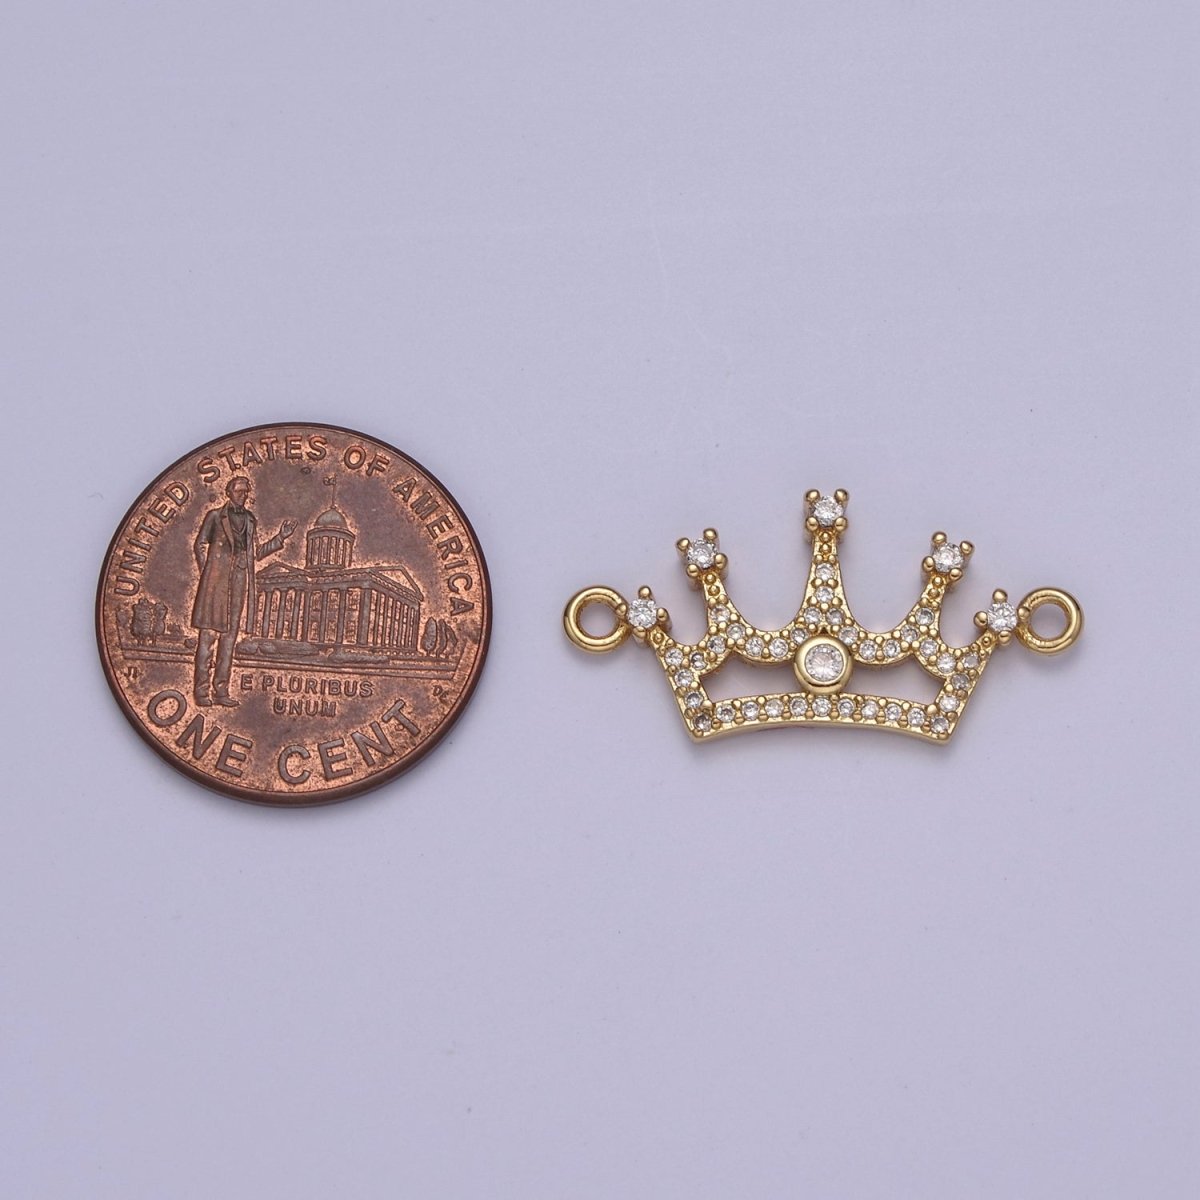 Dainty Tiara Charm Connector in 24k Gold Filled Micro Pave Princess Crown Gift Bracelet Jewelry Making Supply N-120 - DLUXCA